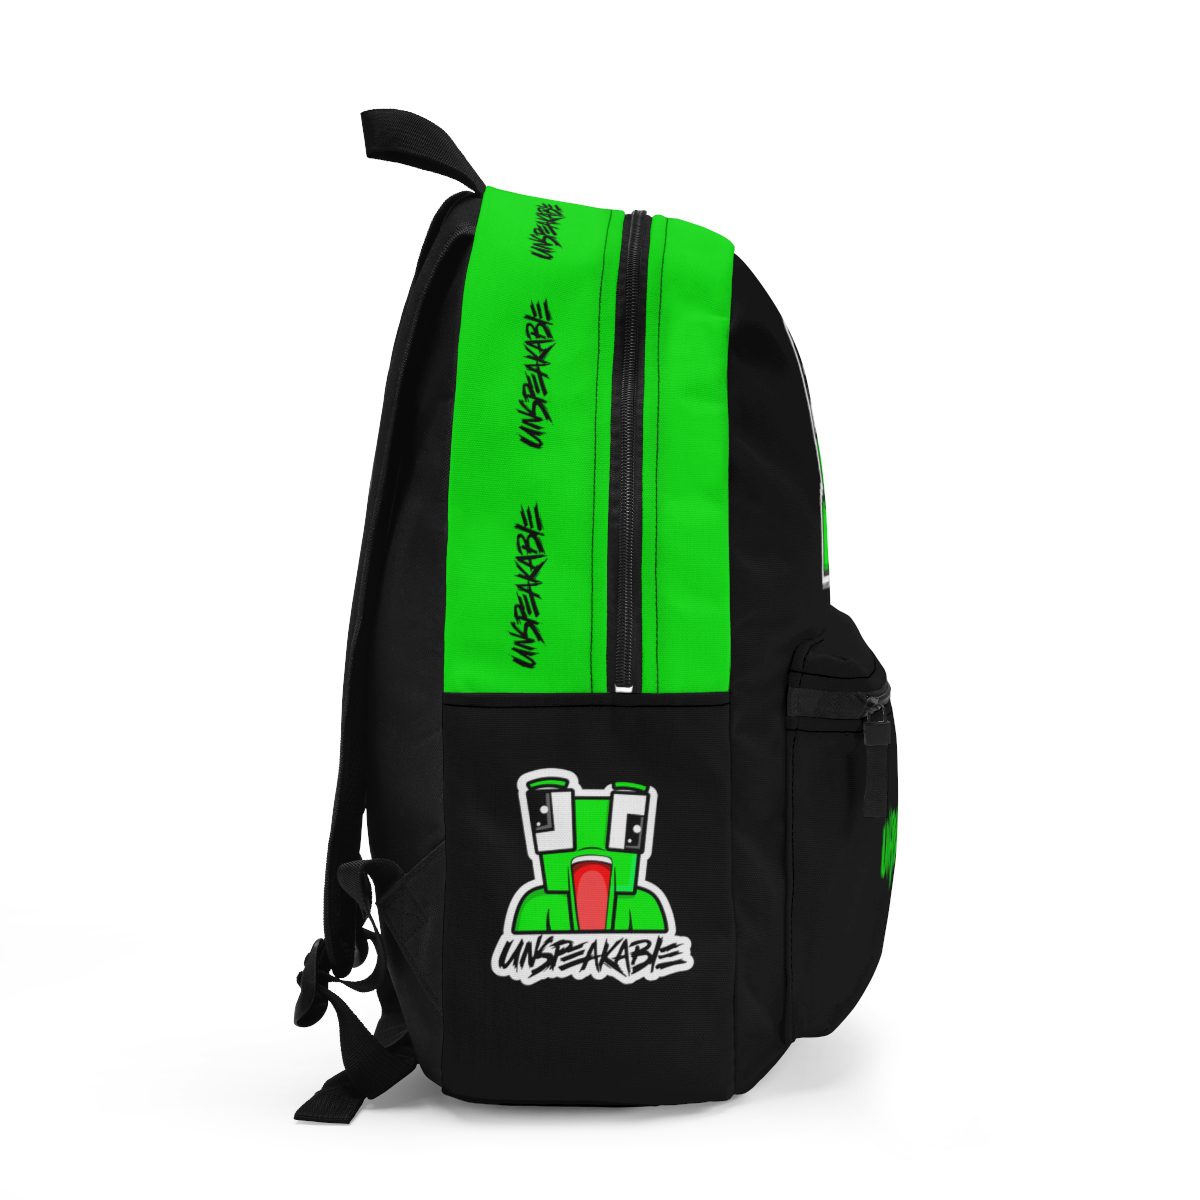 Unspeakable Gaming YouTube Channel Backpack in Black and Neon Green Cool Kiddo 12